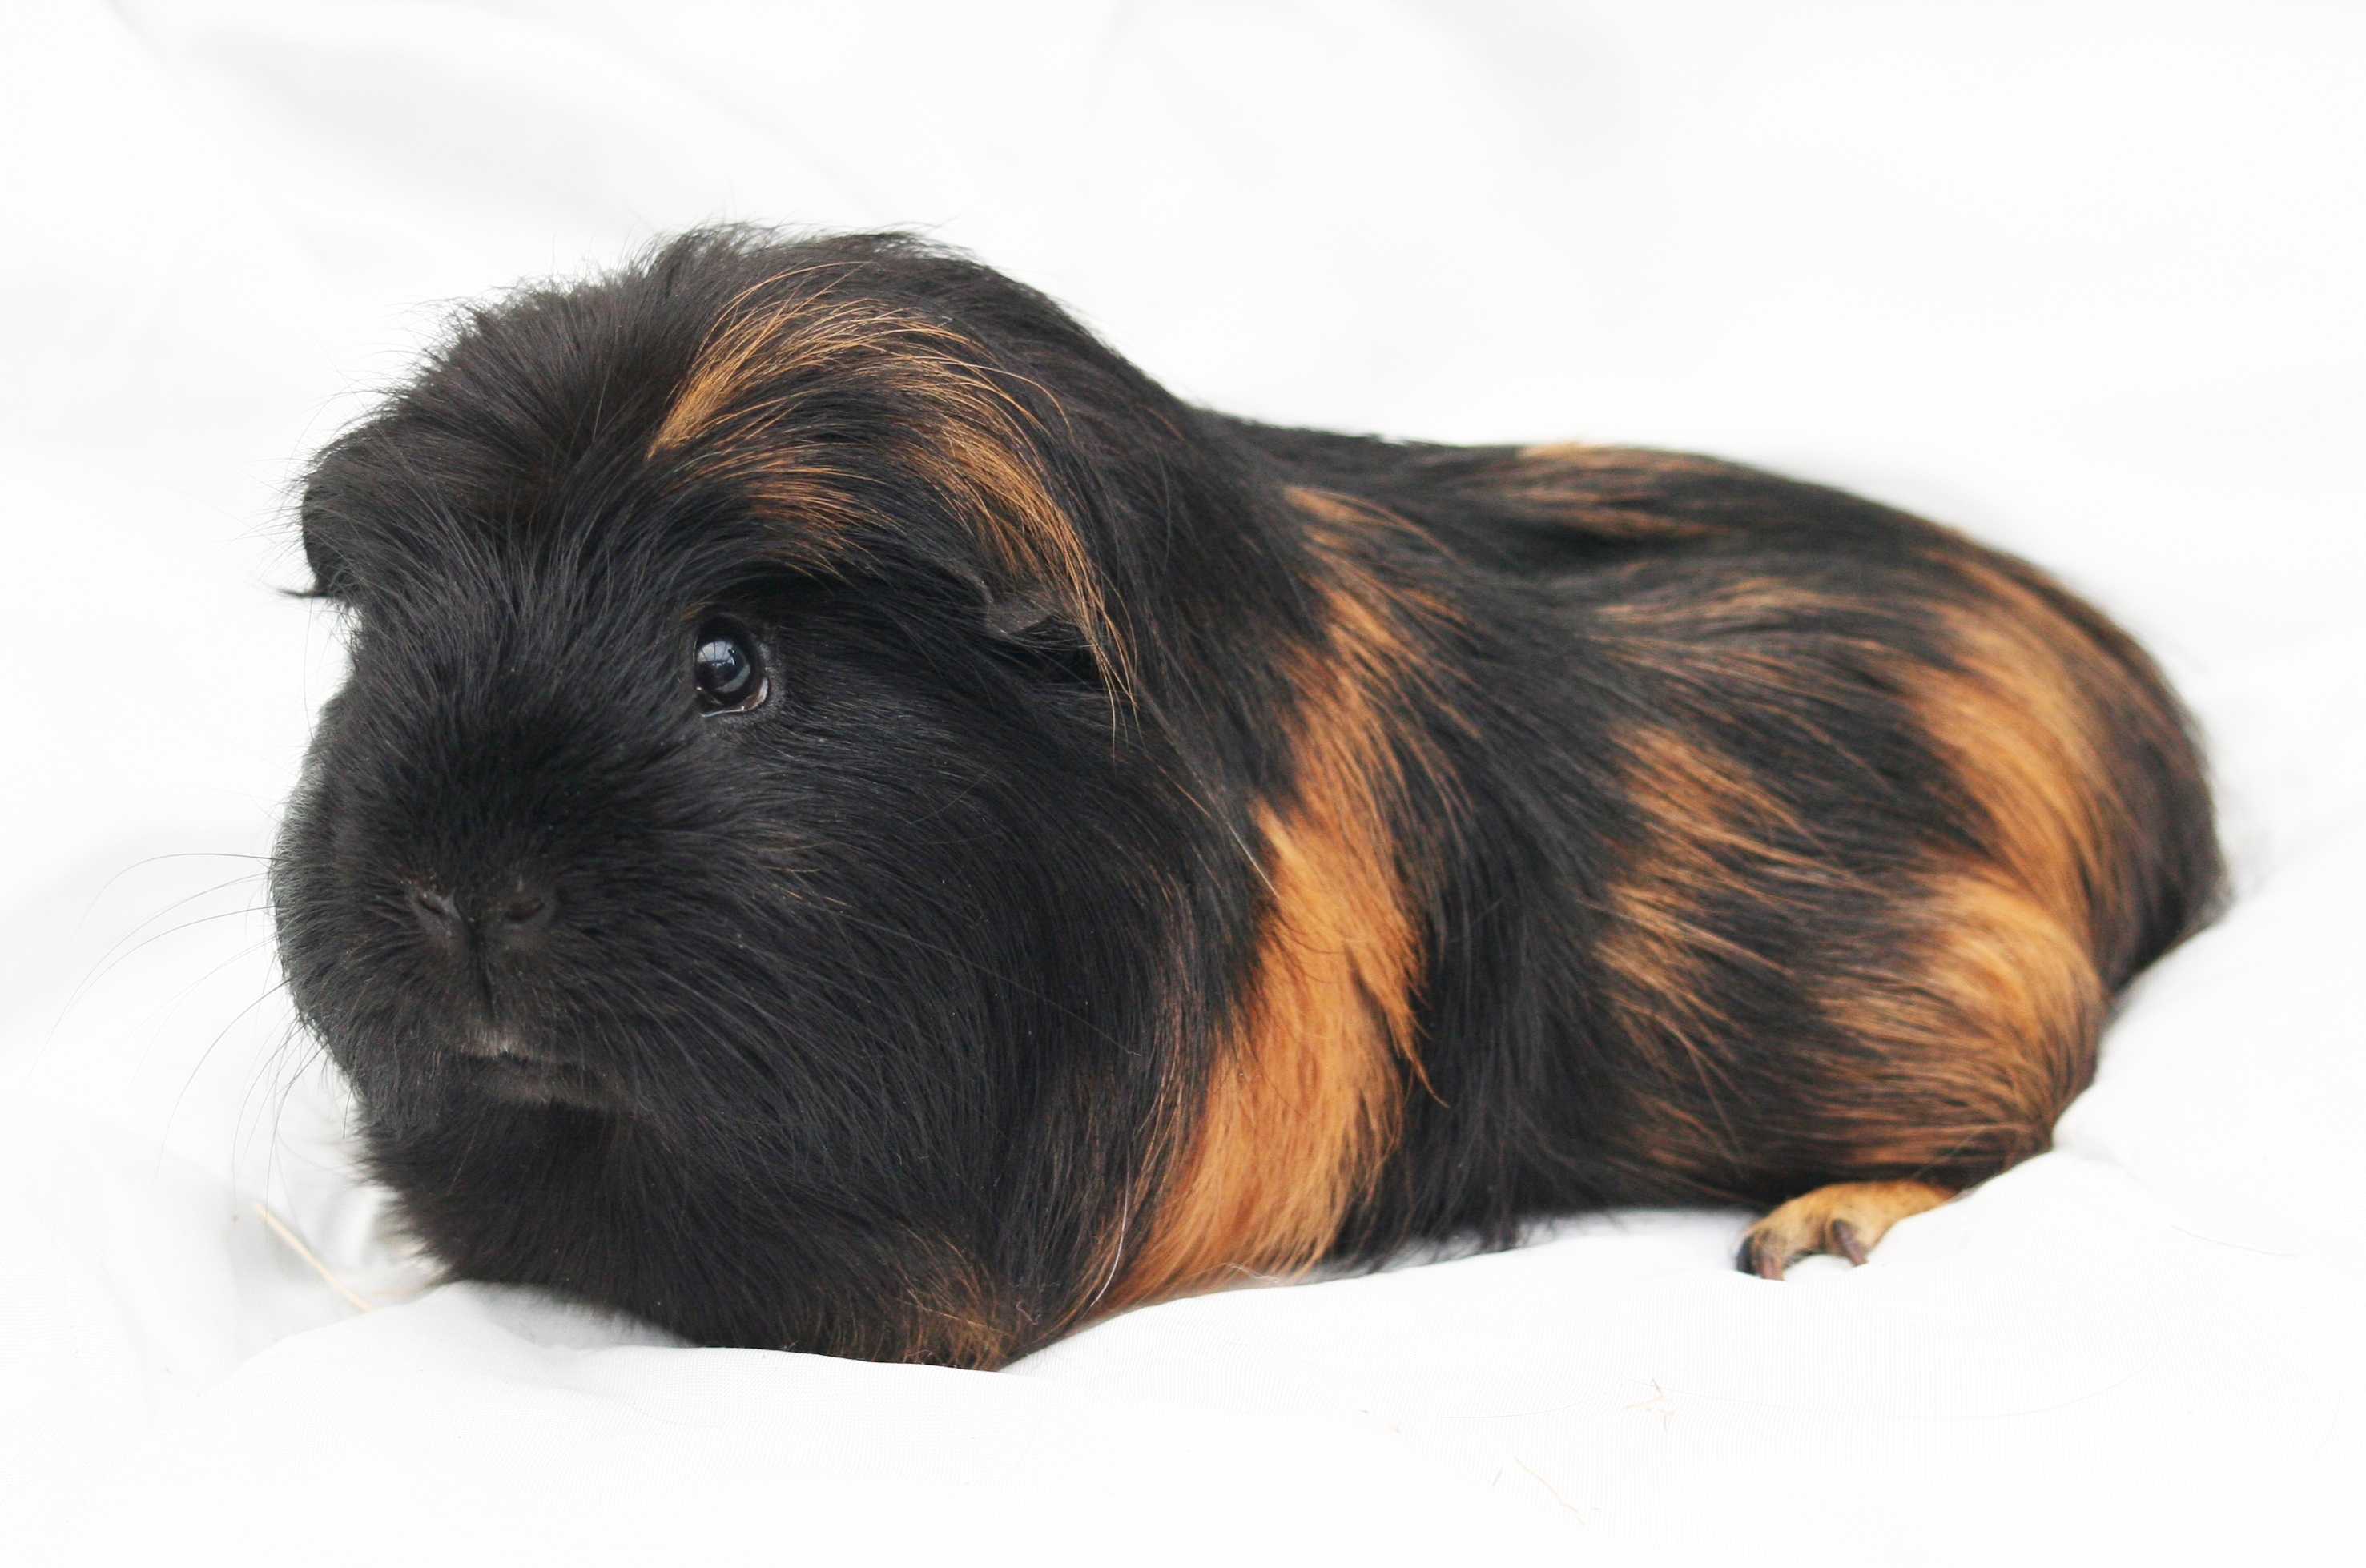 Adorable guinea pig wallpaper, Furry whiskers, Cute rodent, Charming pets, 2960x1960 HD Desktop